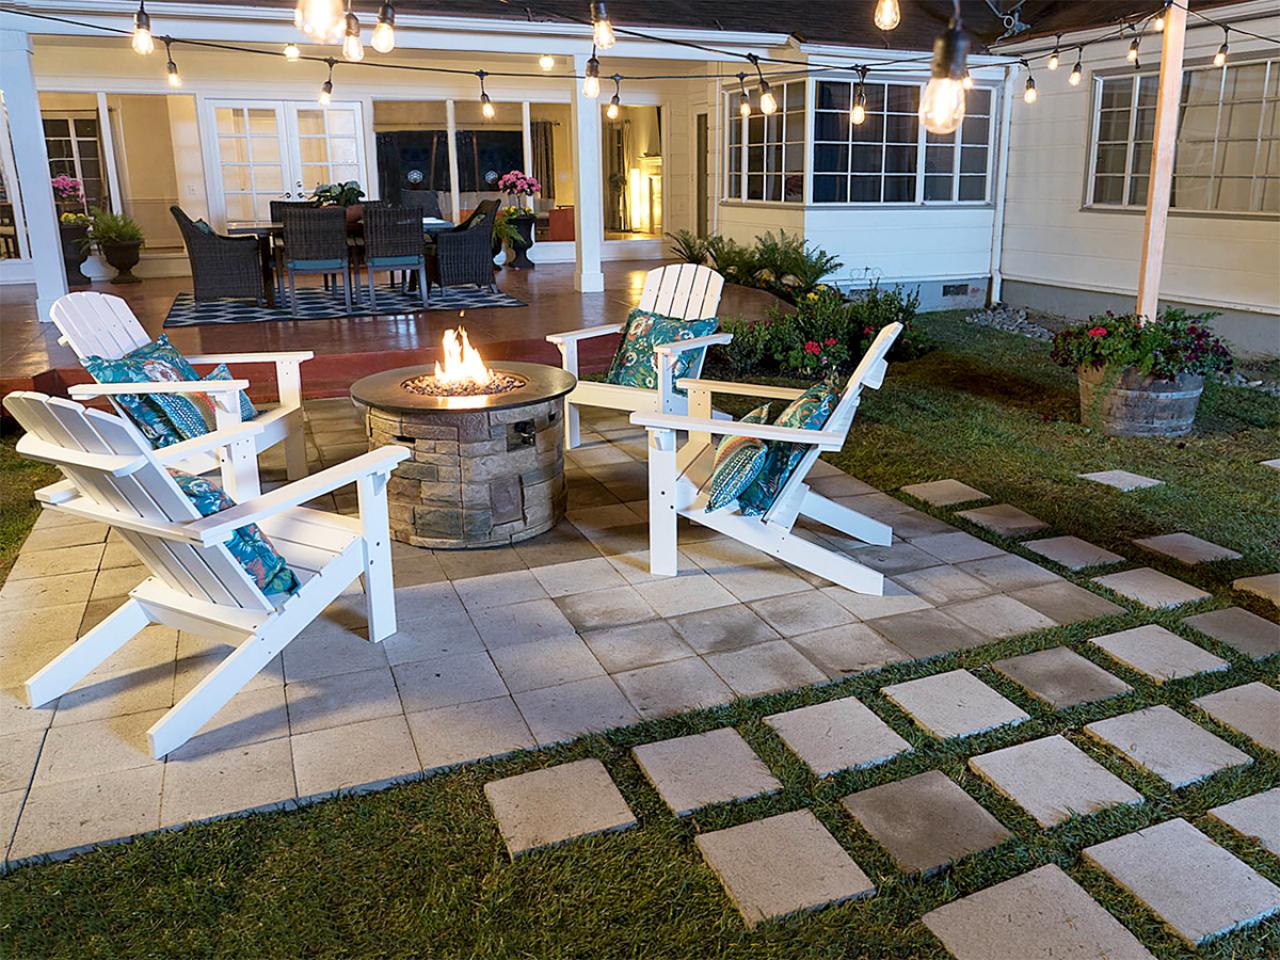 How To Lay A Paver Patio For Firepit, Fire Pit Made Out Of Pavers